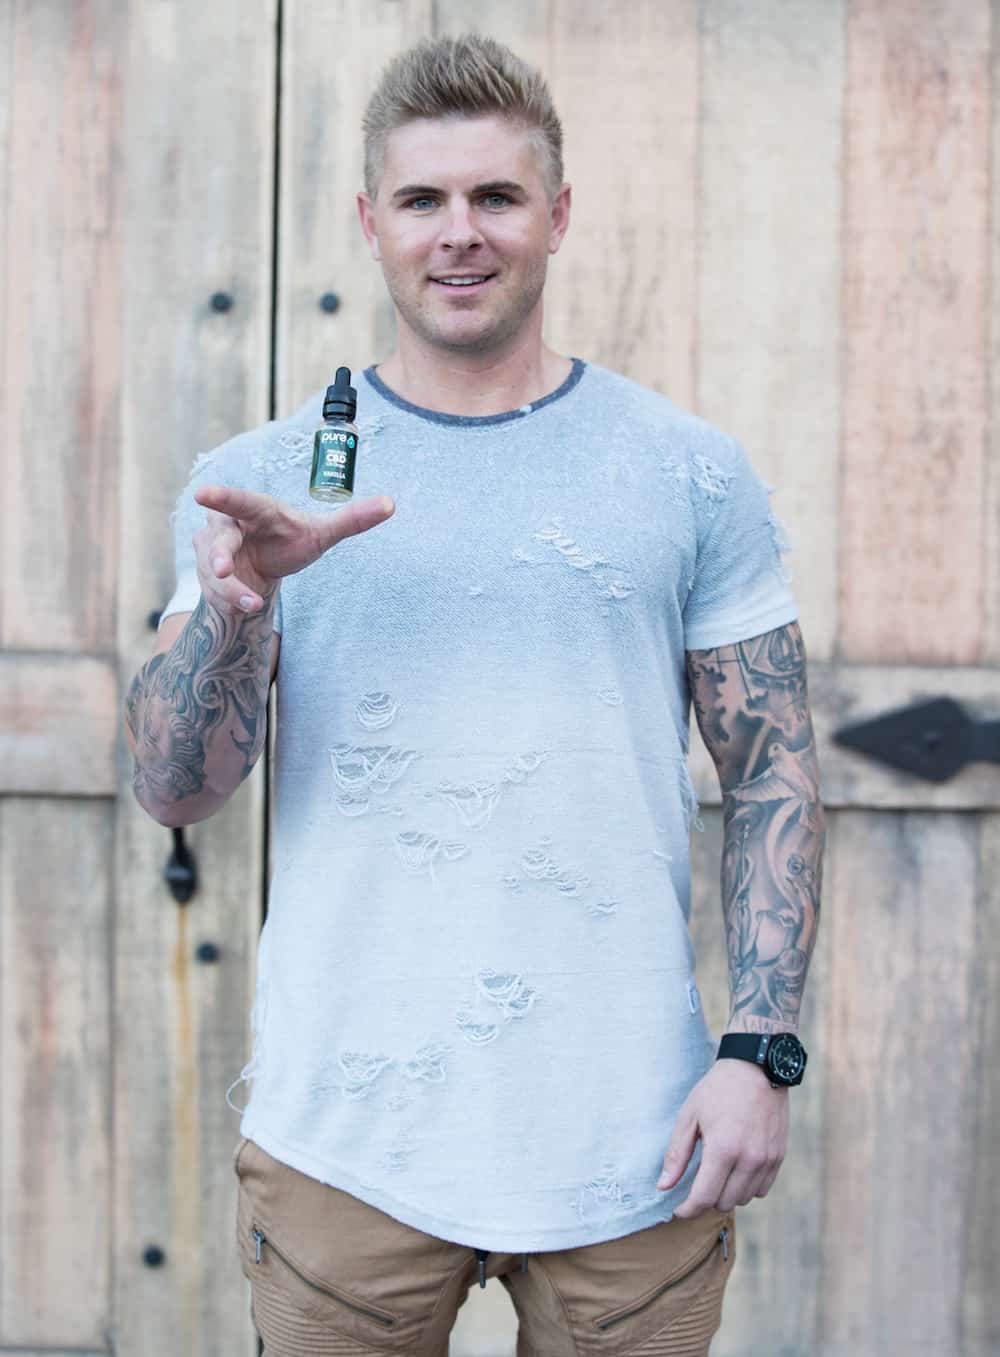 Cody Alt Builds CBD Company in 7 Months, Now Launching Cannabis Products